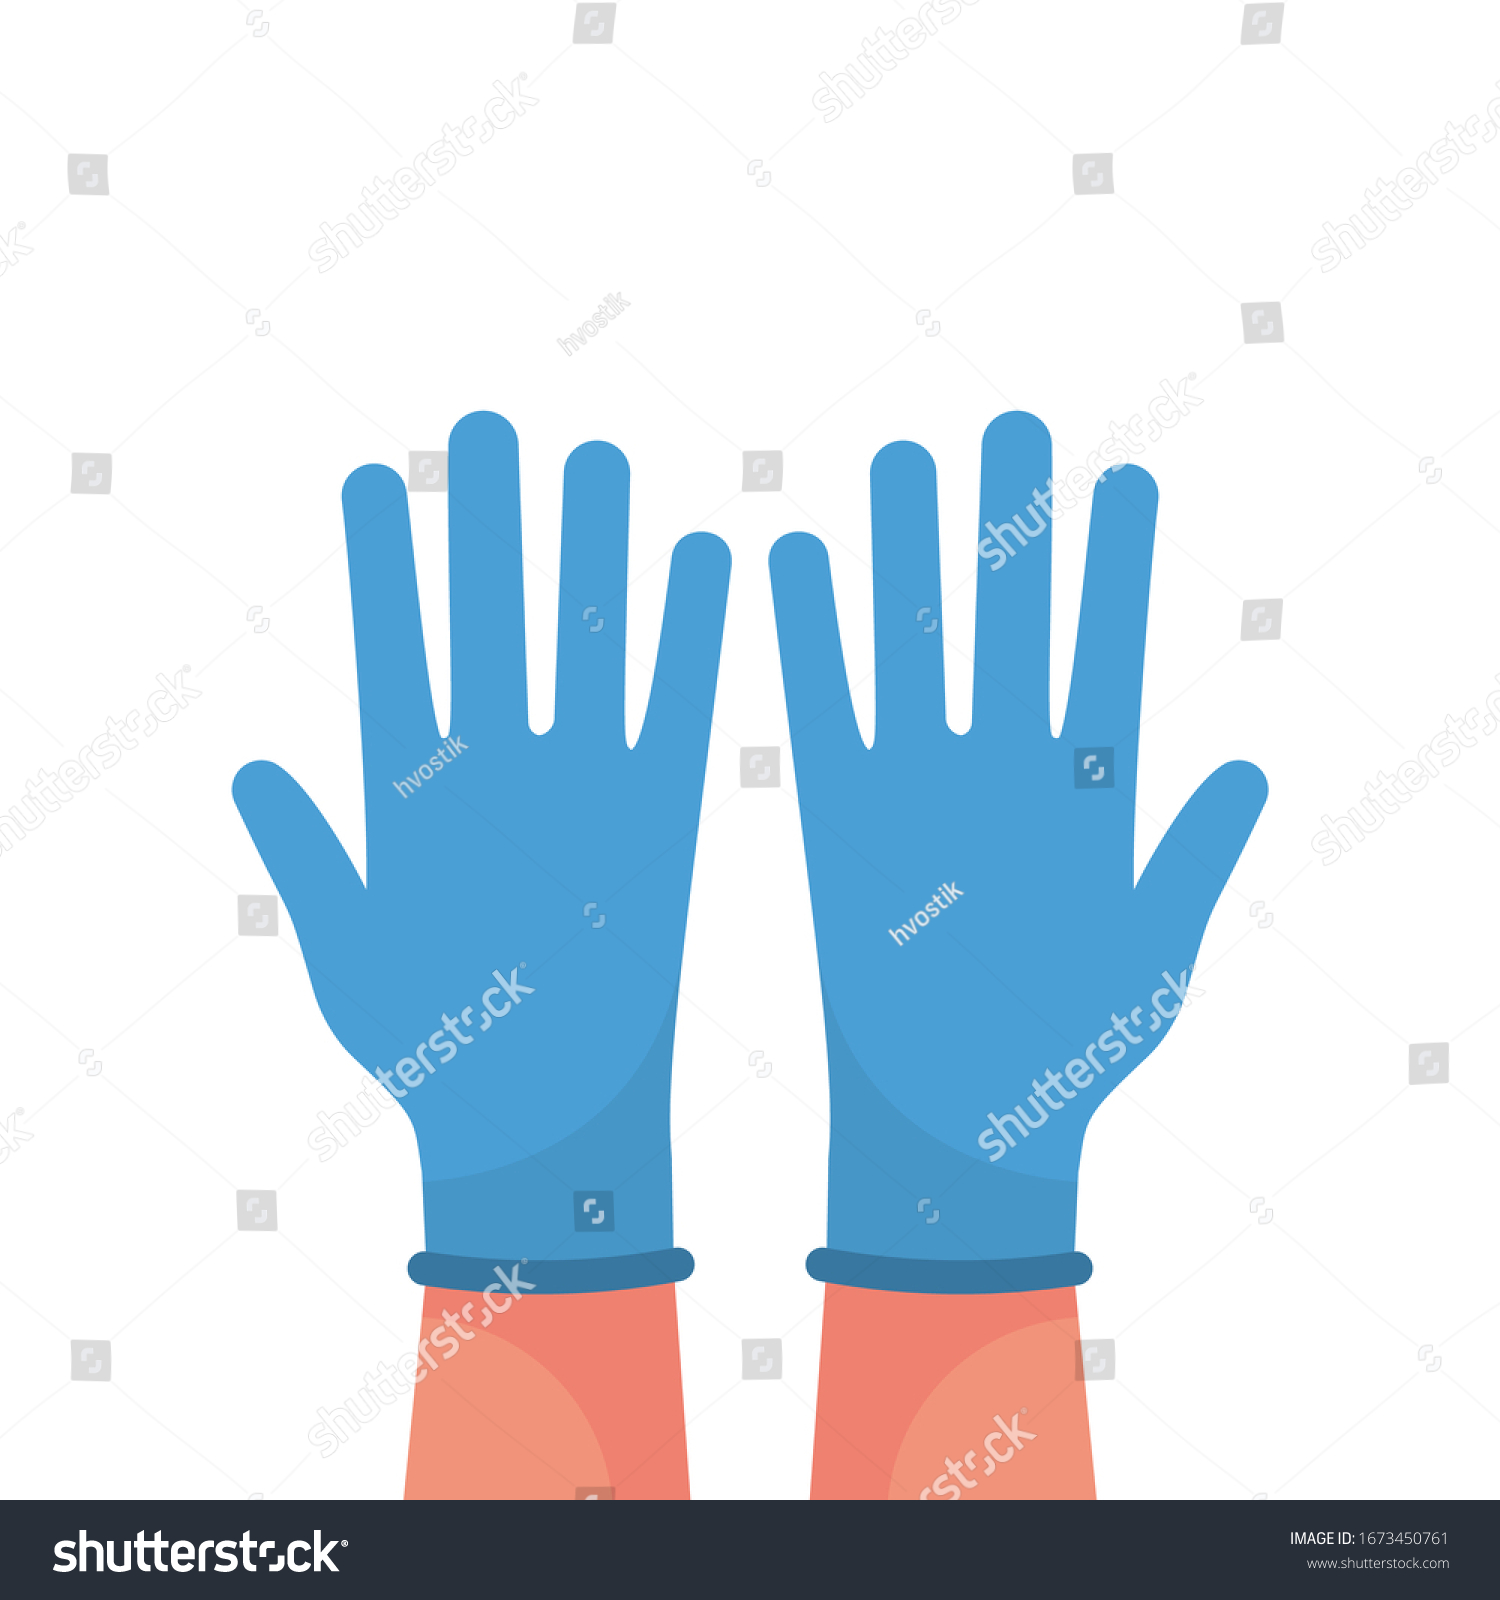 Hands putting on protective blue gloves. Latex gloves as a symbol of protection against viruses and bacteria. Precaution icon. Vector illustration flat design. Isolated on white background. #1673450761